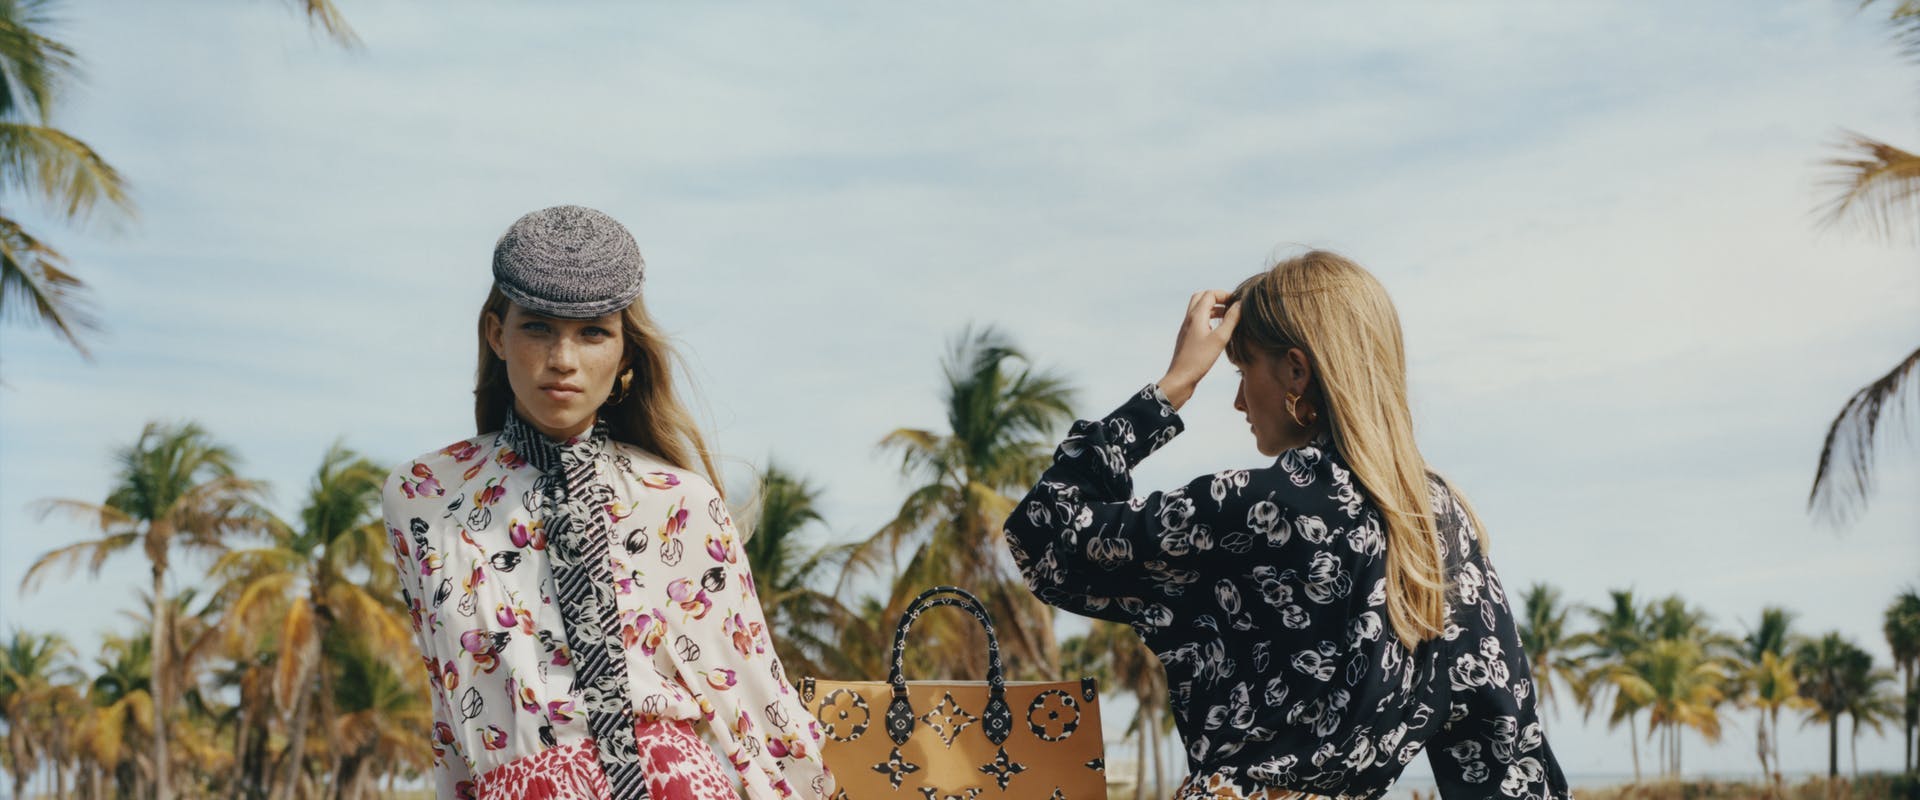 Into the wild with Vuitton Monogram Collection